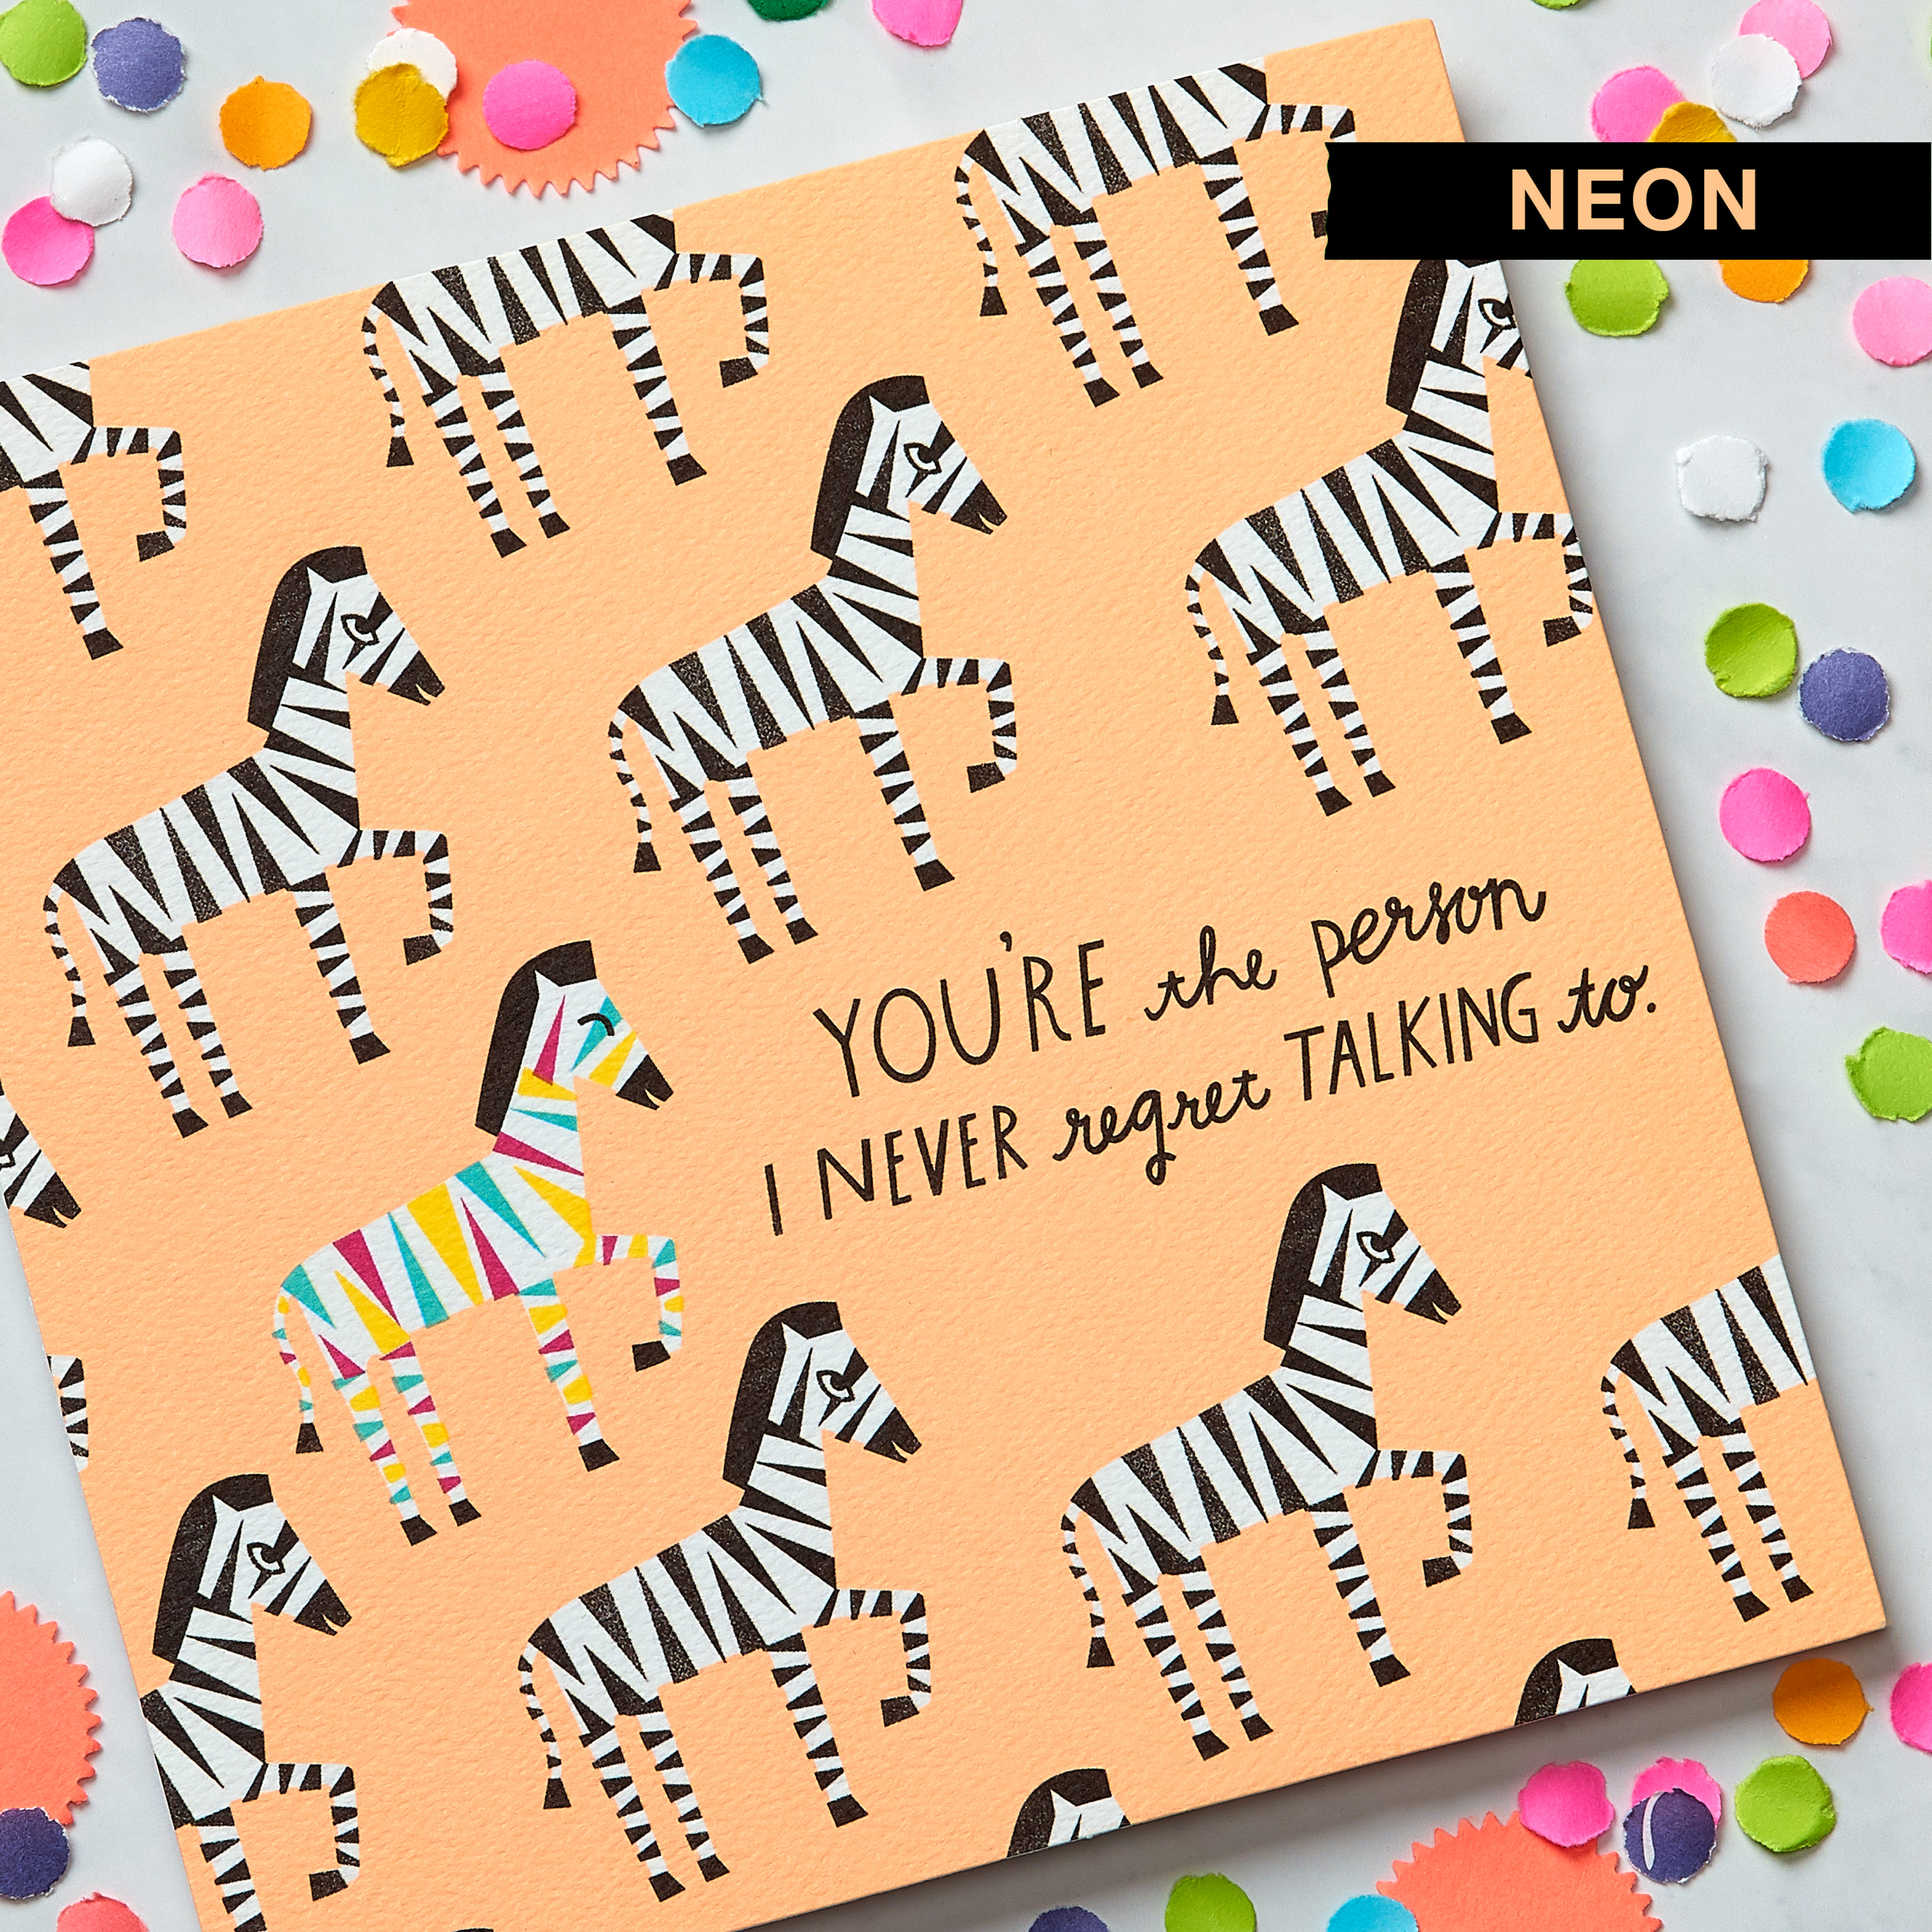 Zebras Greeting Card - Thinking of You, Thank You, Friendship image